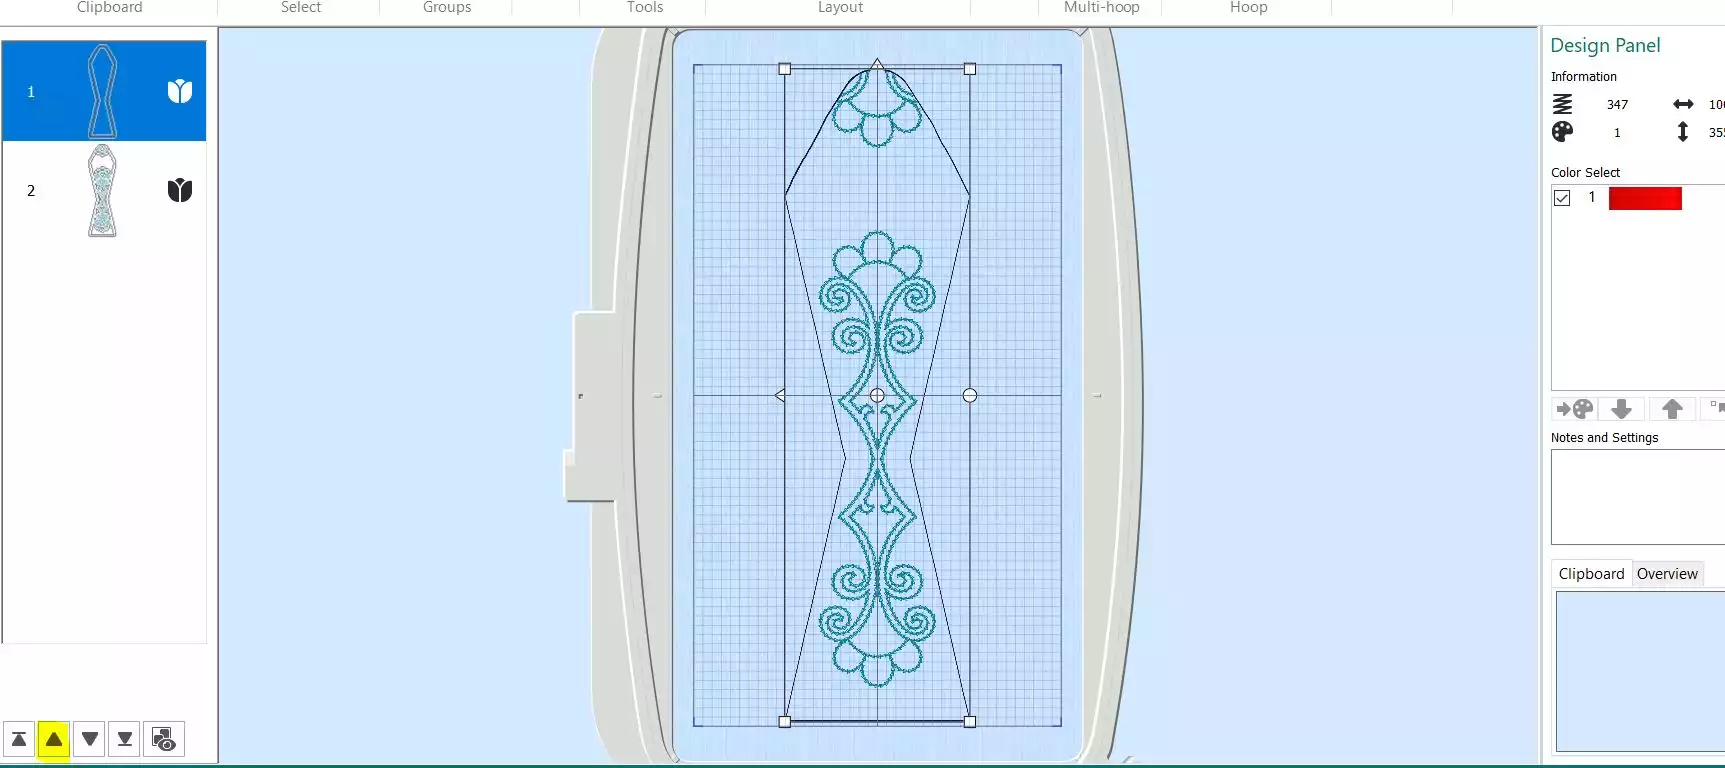 Resized-scissors-cover-with-in-the-hoop-embroidery-design-step10-move-up-basting-stitches.jpg